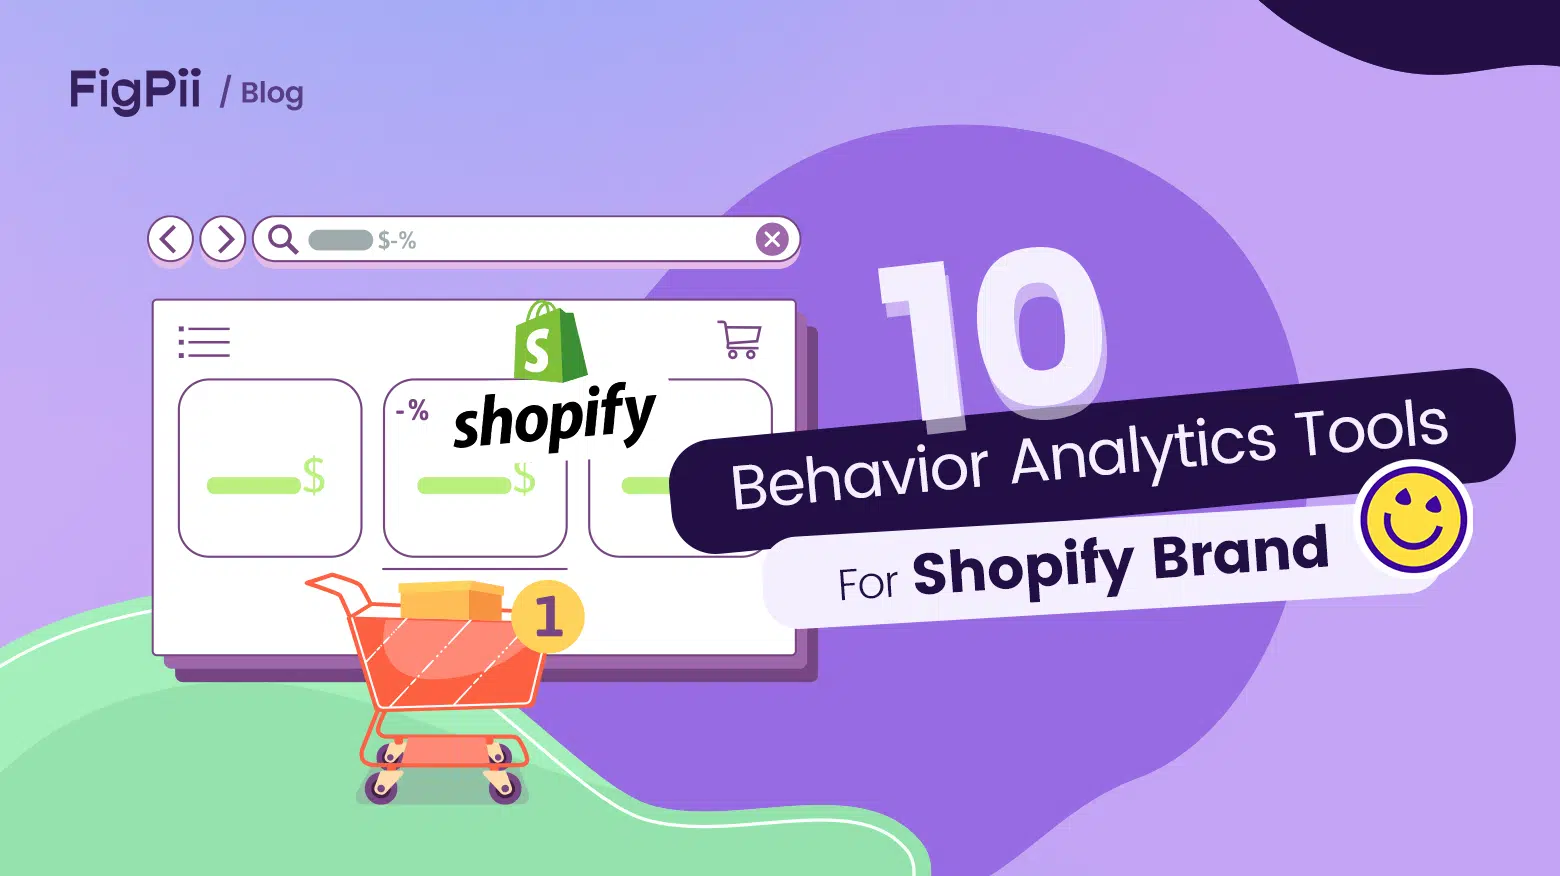 An image containing the text "10 Behavior Analytics Tools For Shopify Brand"